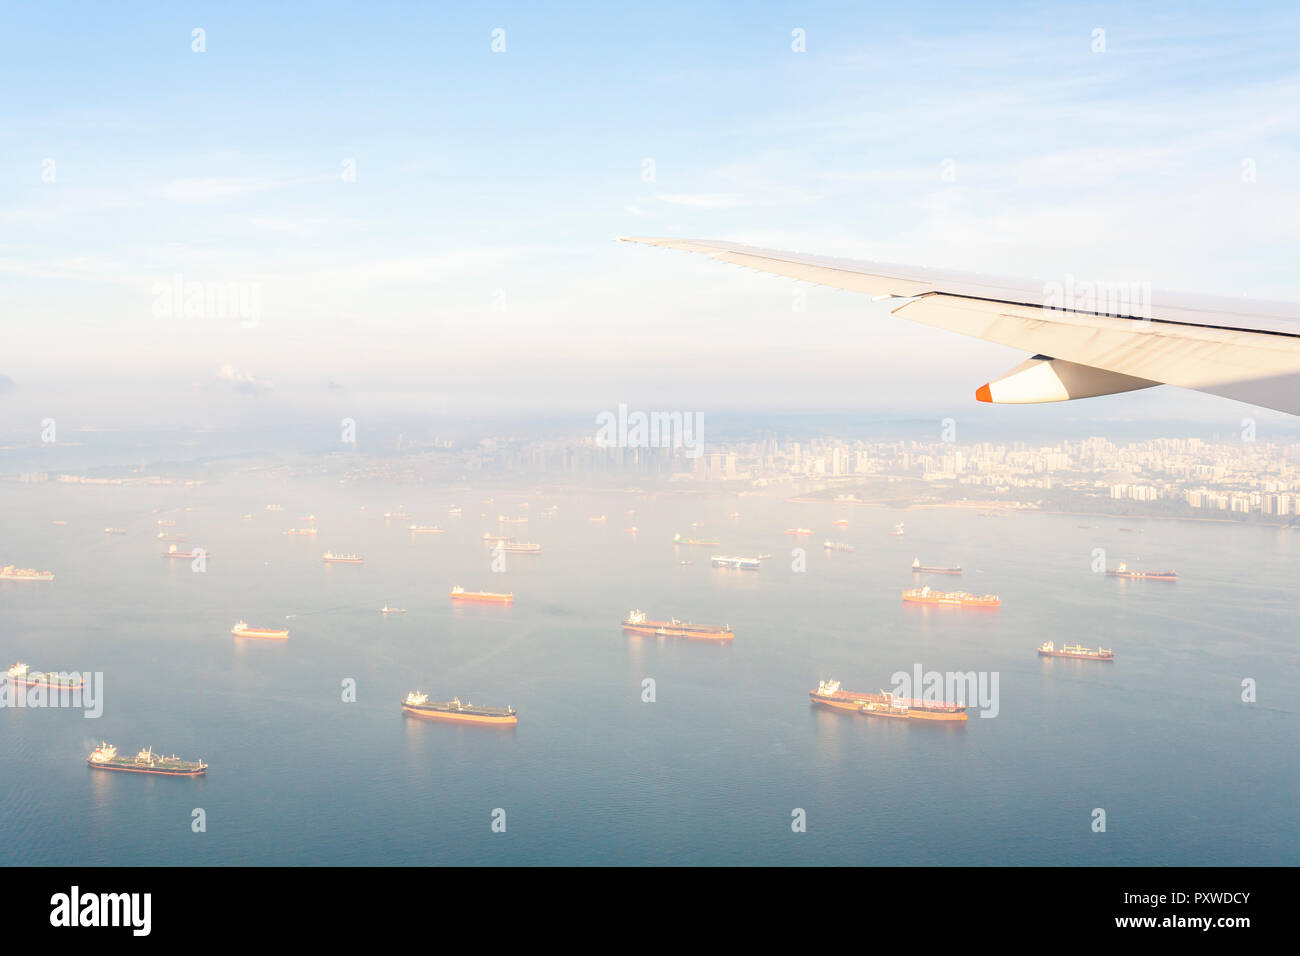 Indonesia, Bali, wing of an airplane above the sea Stock Photo